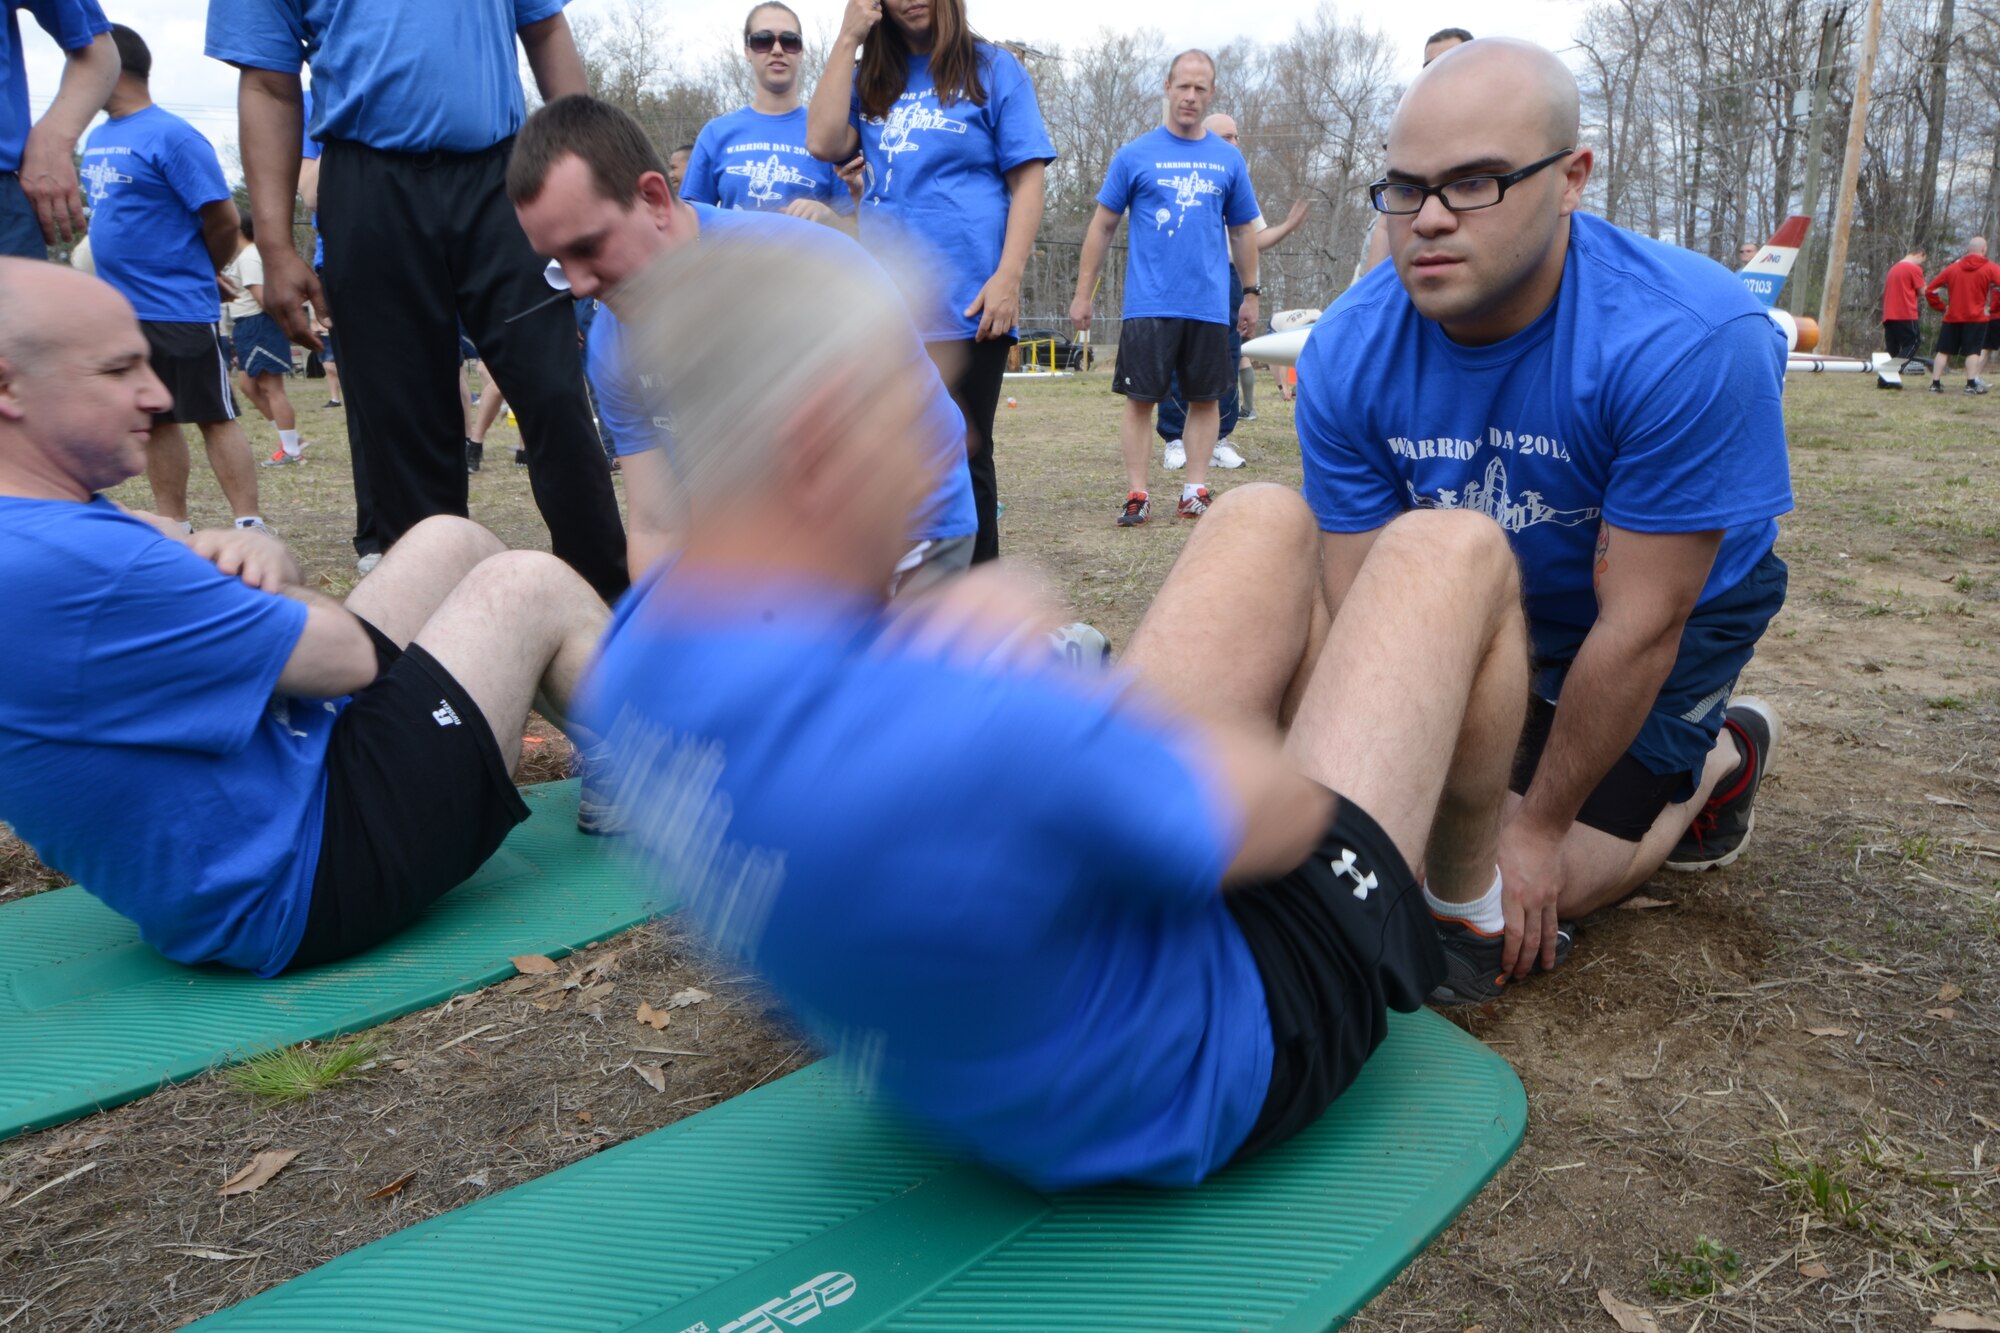 Senior Airman Emmanuel Santiago, 103rd Public Affairs photo journalist, holds the feet of Lt. Col. James Guerrera, executive officer with the 103rd Airlift Wing, as he tries to get as many sit-ups accomplished as he can during the second annual Yankee Warrior Day. The event which was held on May 3, 2014, at the Bradley Air National Guard Base, East Granby, Conn., allowed Airmen an opportunity to compete against each other during various events for a chance at winning a trophy. (U.S. Air Force photo by Tech. Sgt. Joshua Mead)